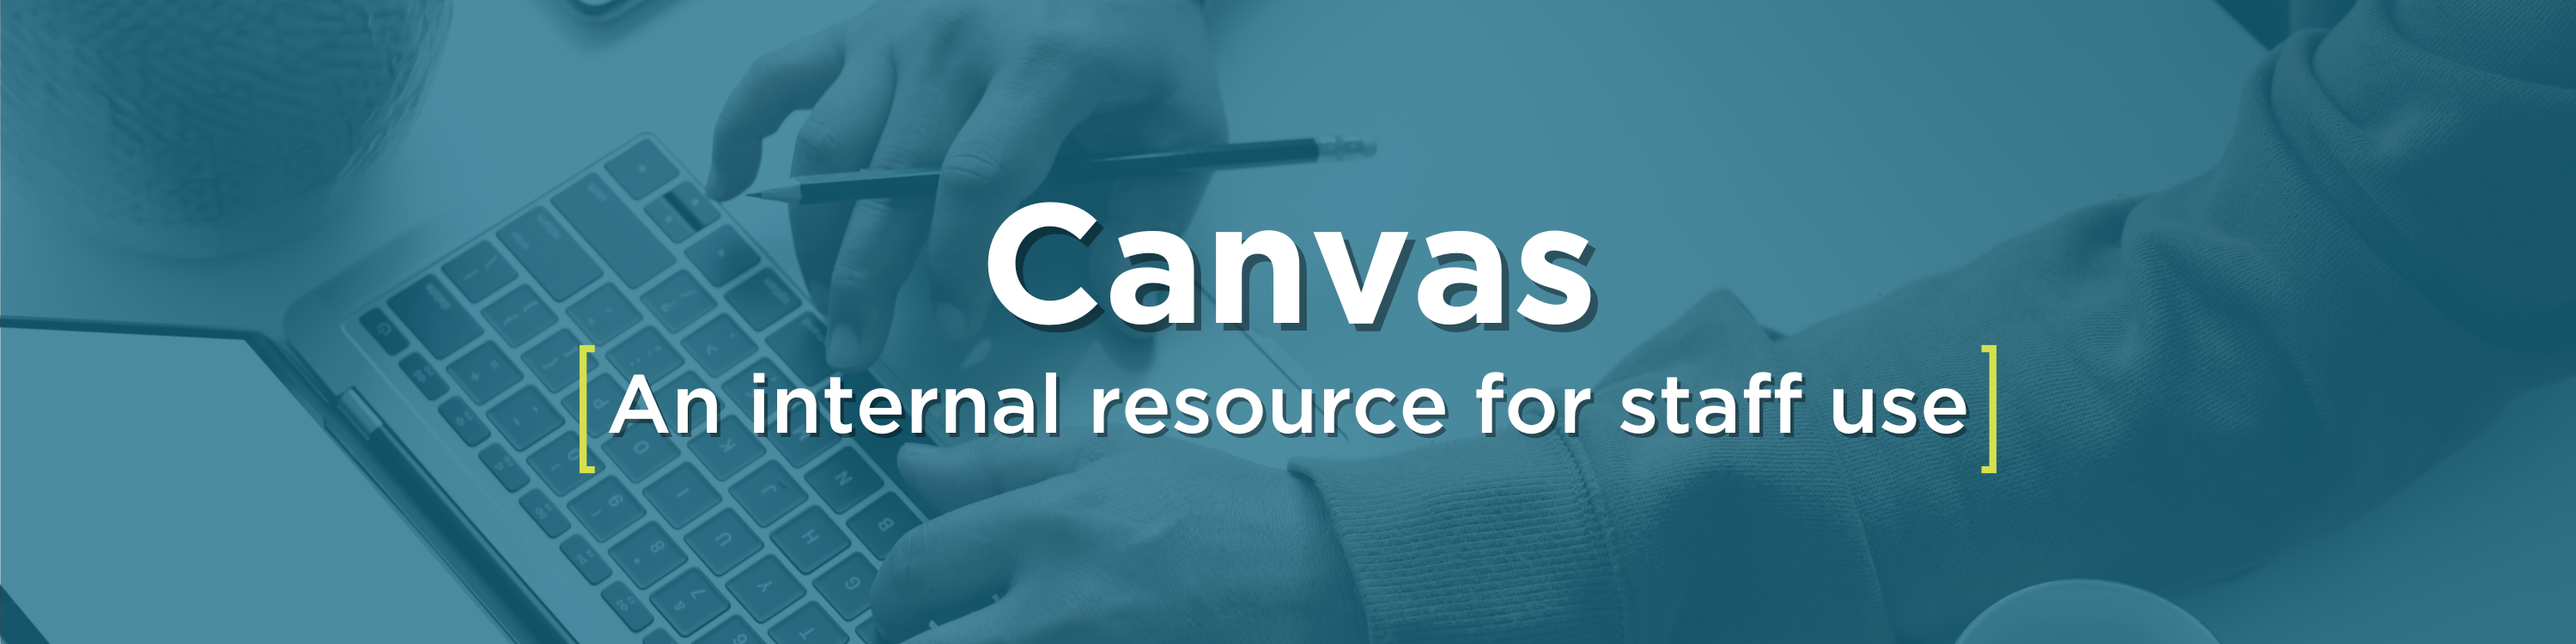 Canvas. An internal resource page for staff use